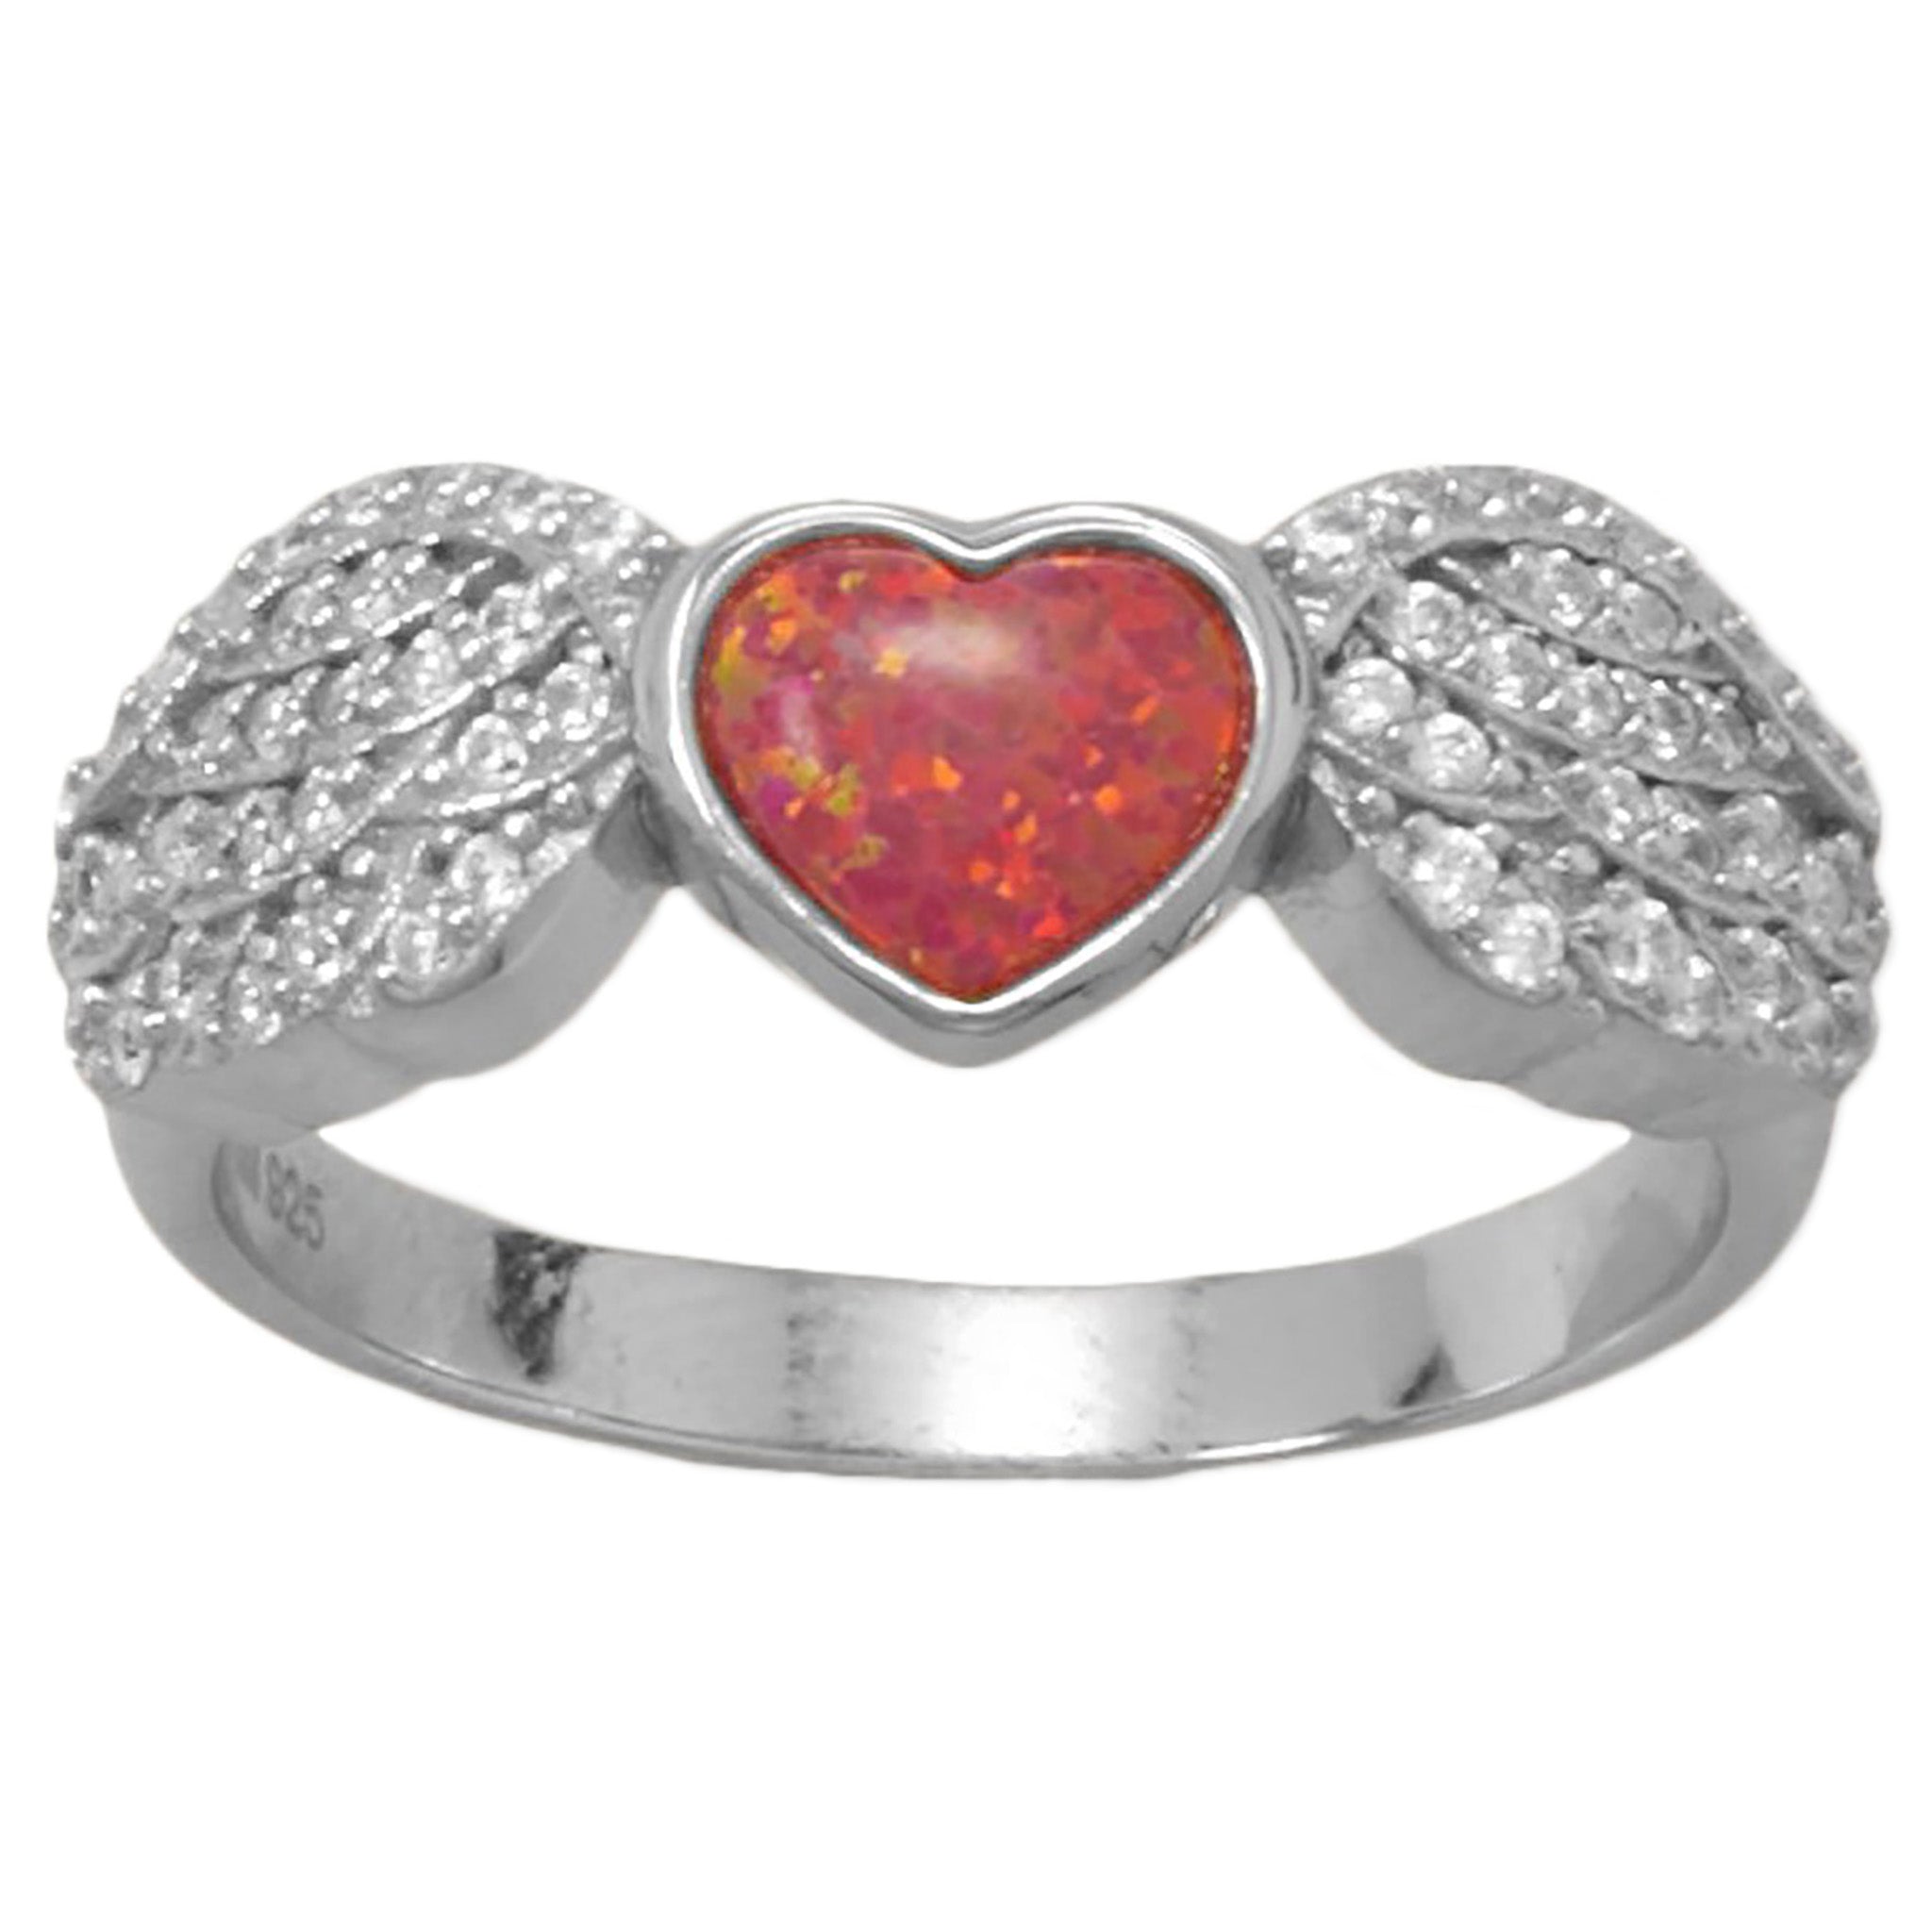 Red Opal Heart Ring